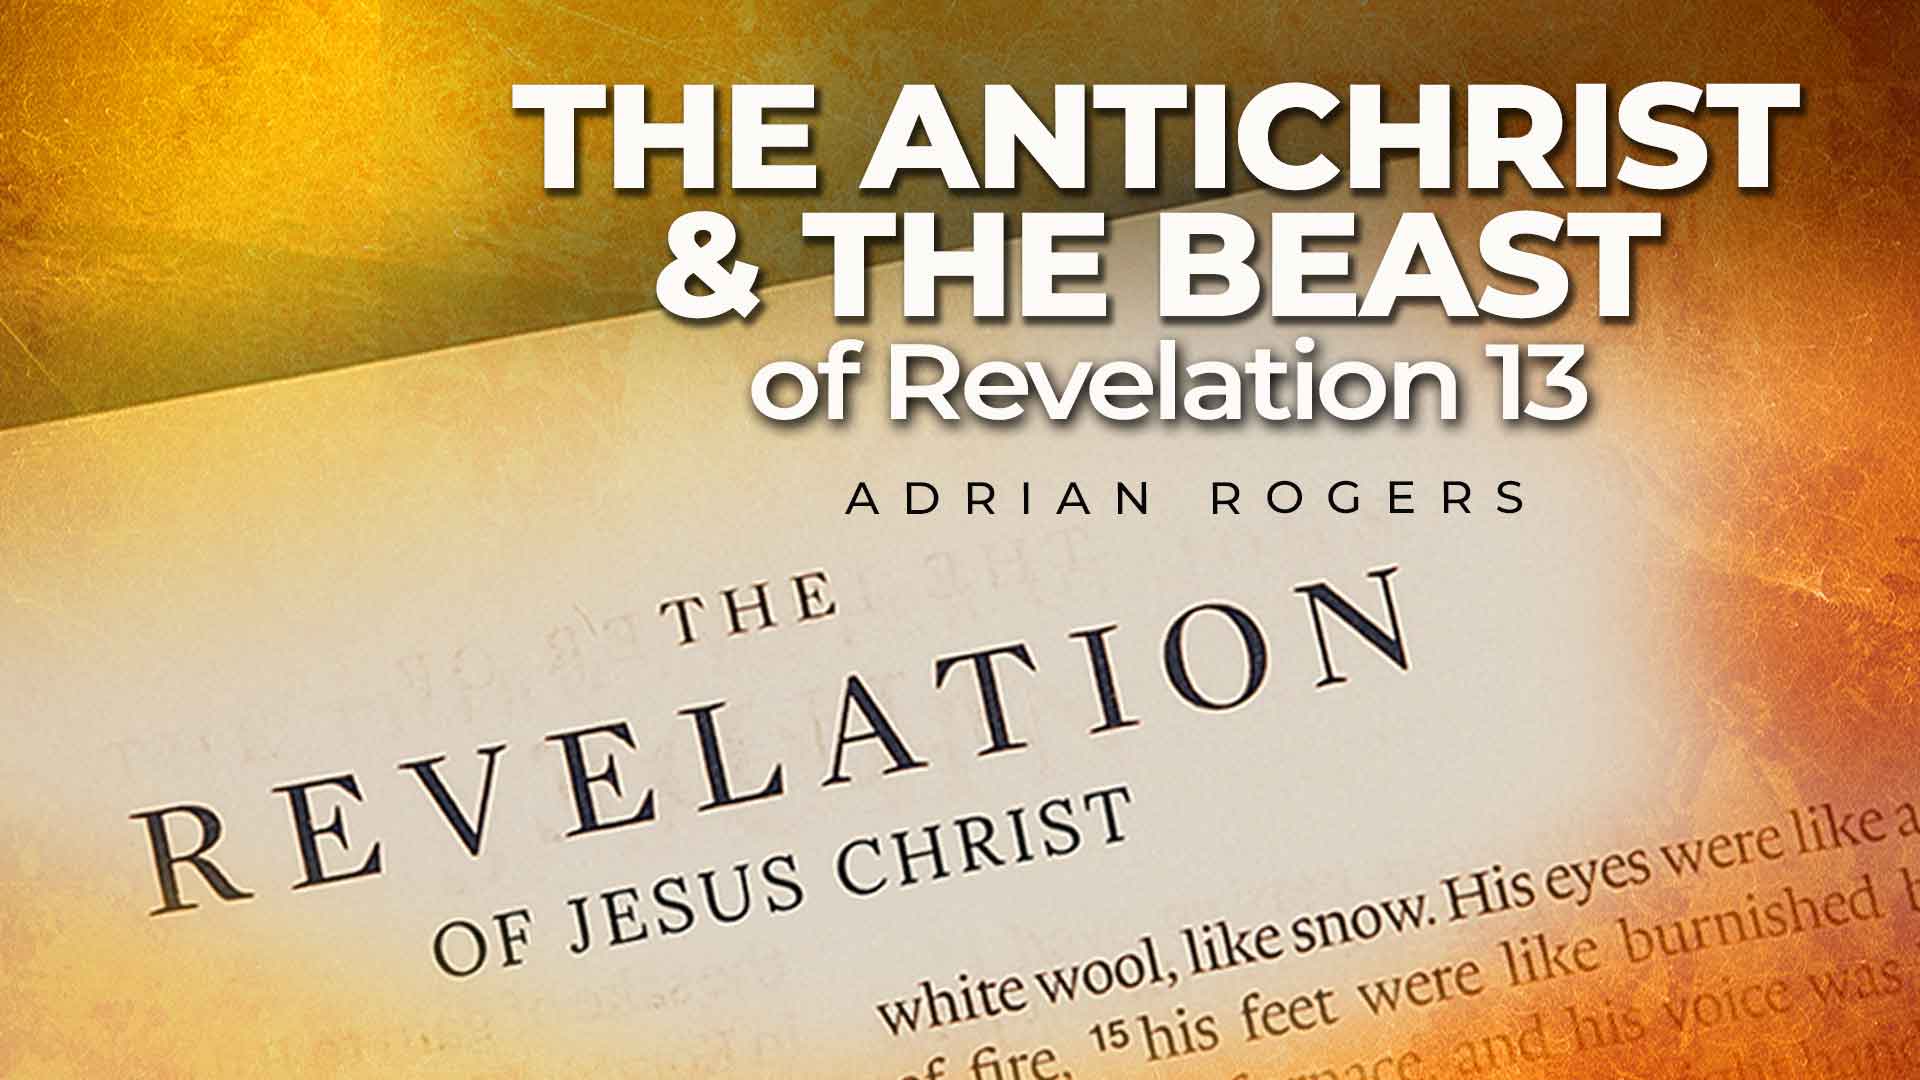 The Antichrist and the Beast in Revelation 13 1920x1080jpg